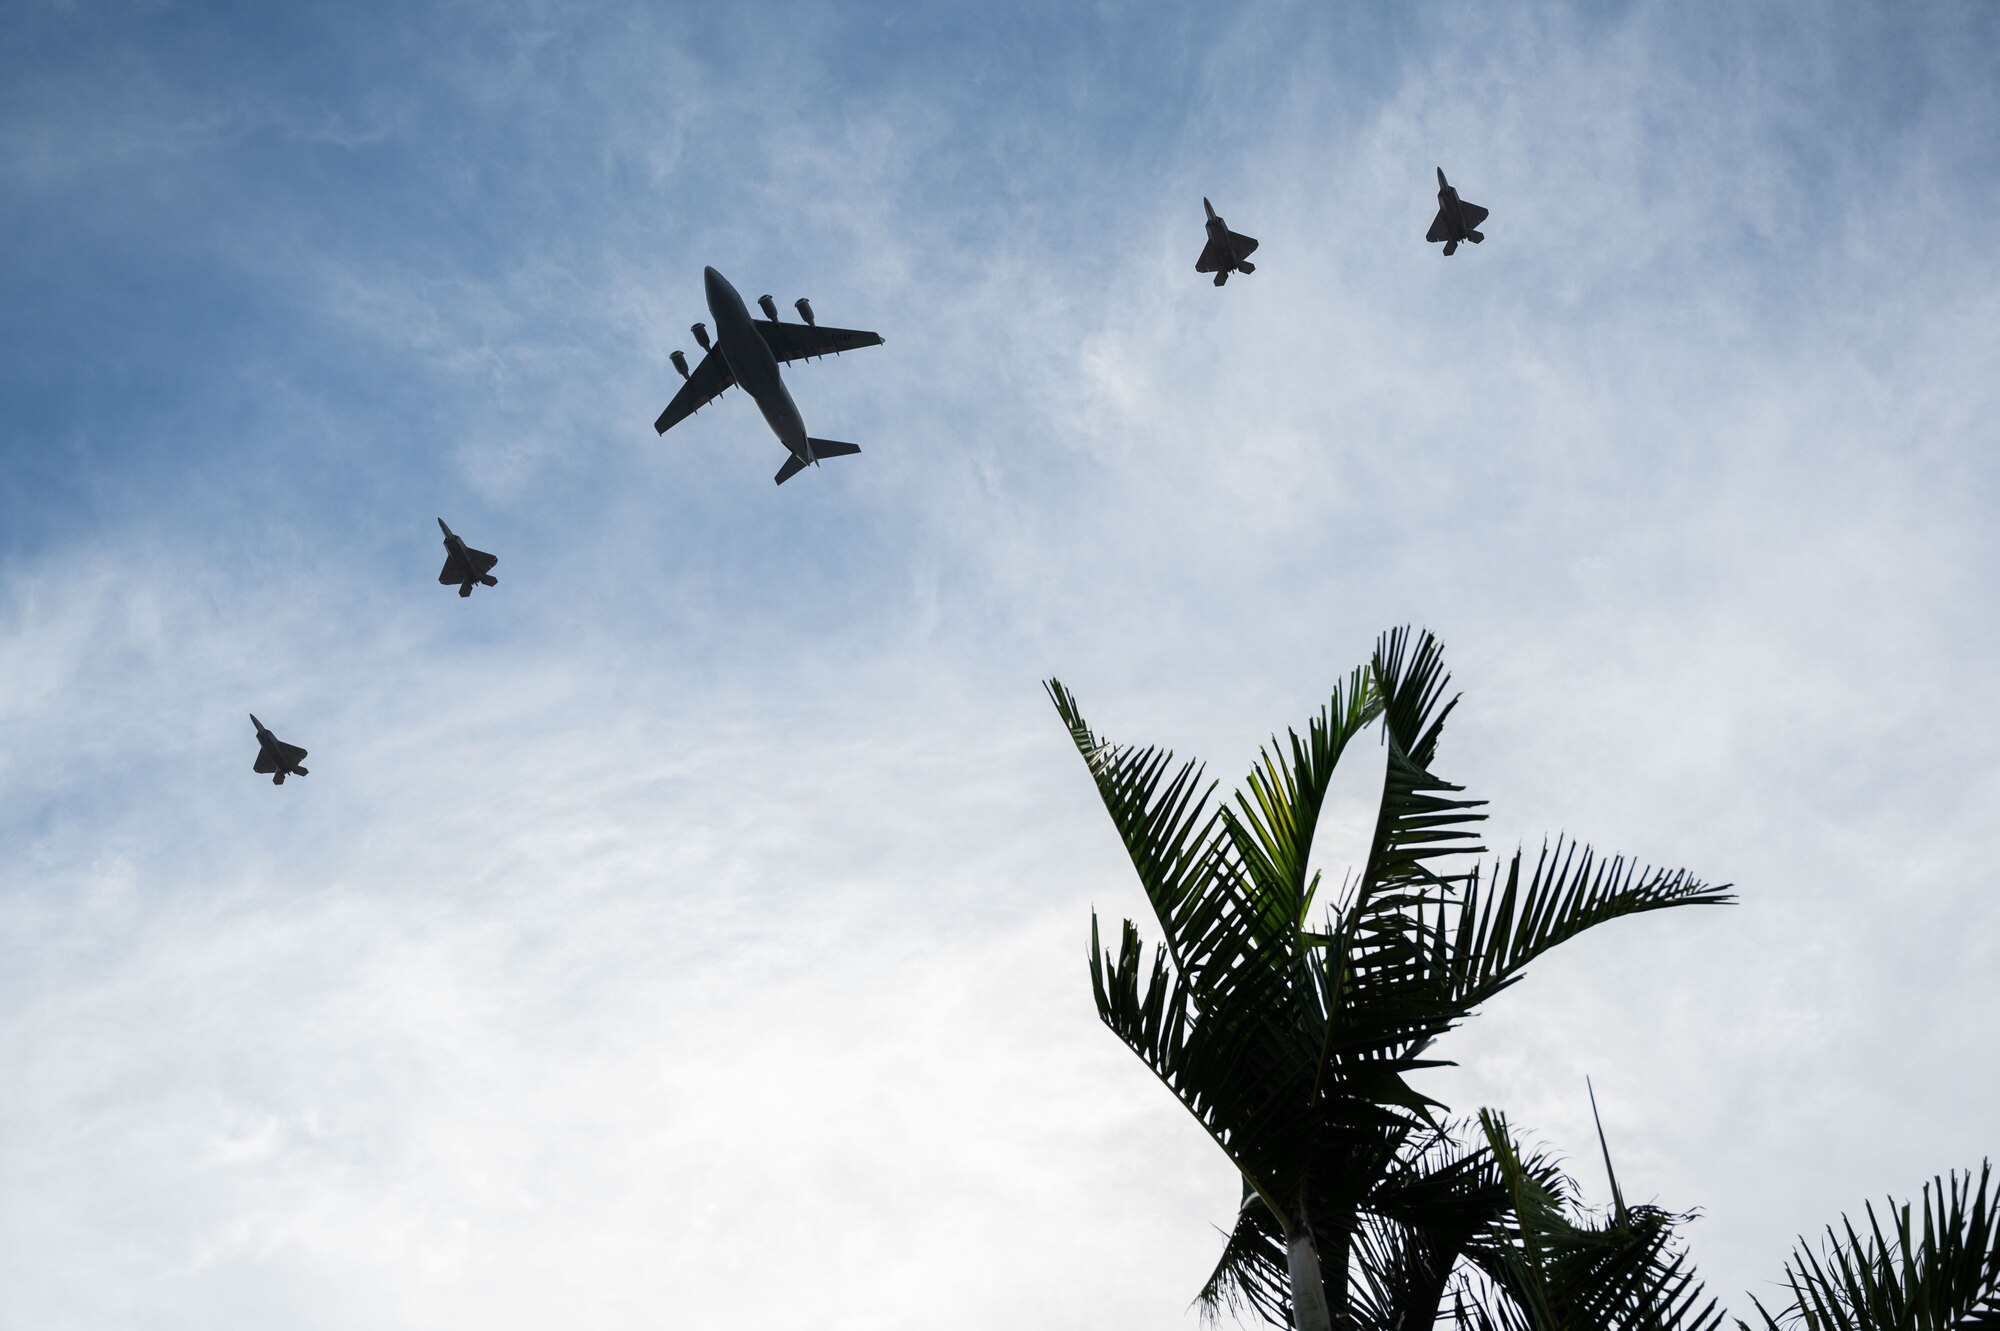 Four Hawaii Air National Guard F-22 Raptors and a C-17 Globemaster III from the 535th Airlift Squadron conduct a flyover of the opening ceremony for the Pacific Air Chiefs Symposium 2023 at Joint Base Pearl Harbor-Hickam, Hawaii, Nov. 14, 2023. Air Chiefs from more than 20 countries participated in PACS 23 which aims to strengthen alliances and partnerships throughout the region. (U.S. Air Force photo by Tech. Sgt. Hailey Haux)